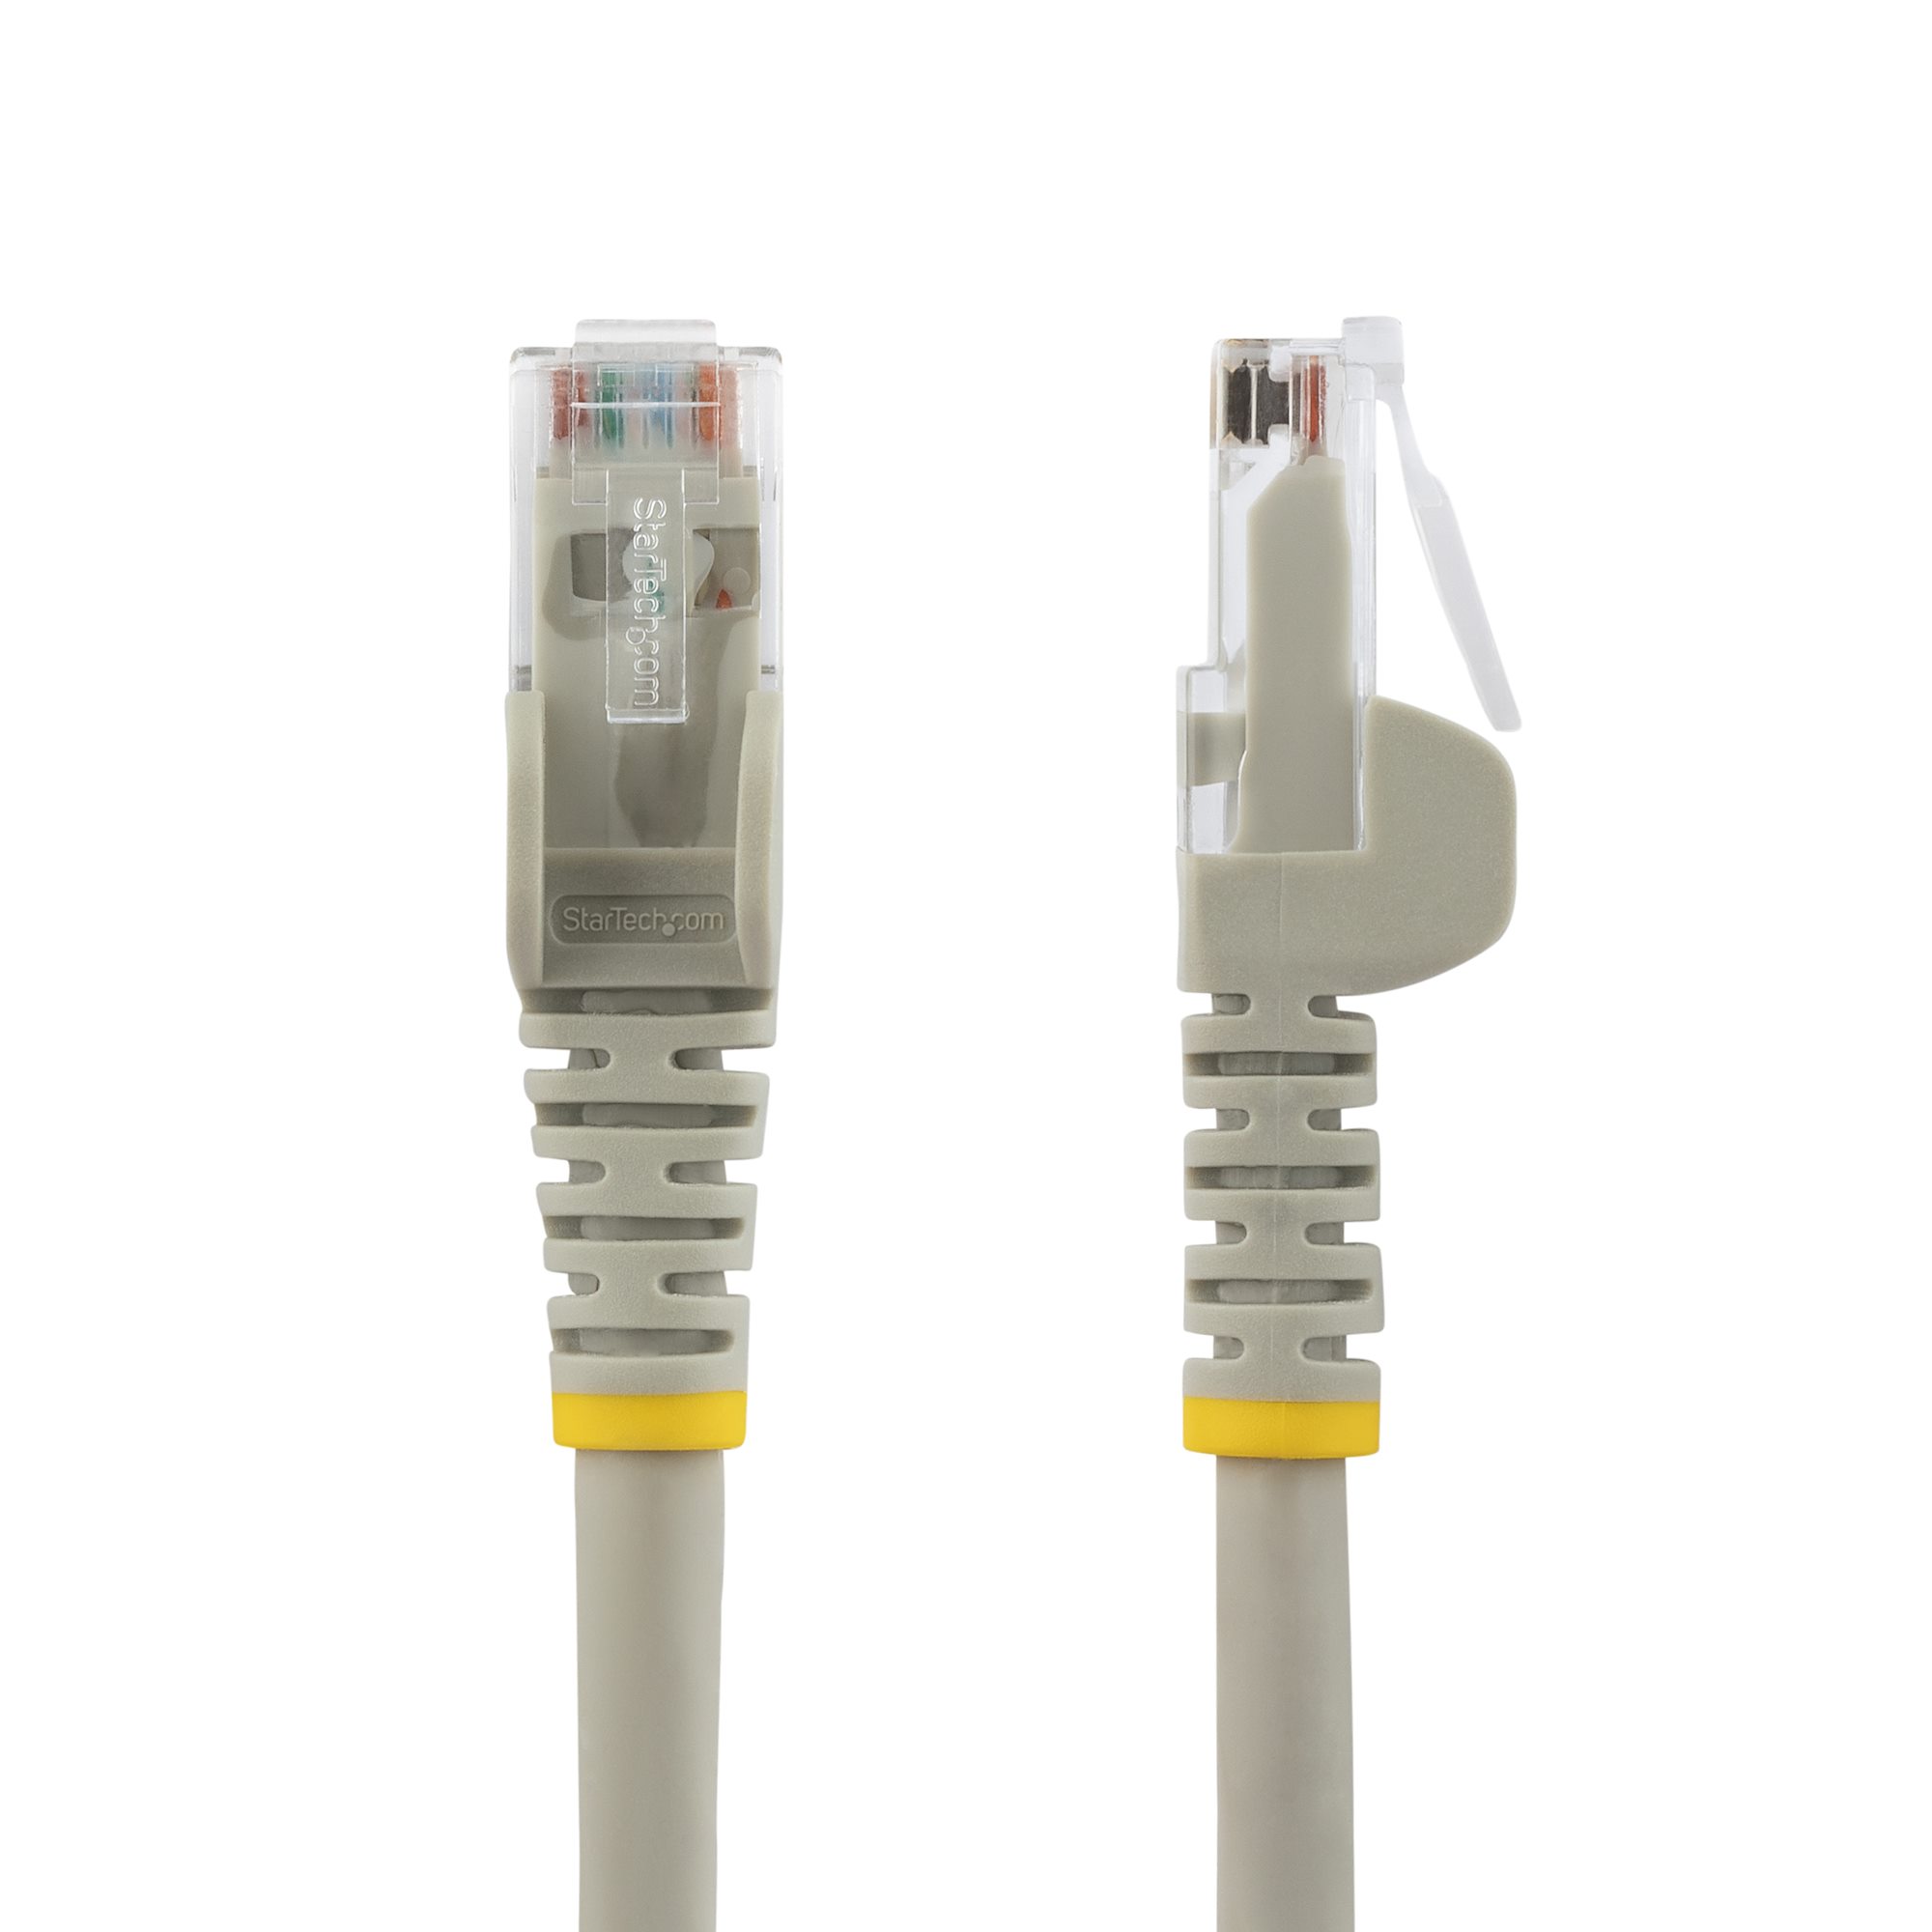 Cable Ethernet 3m 10ft